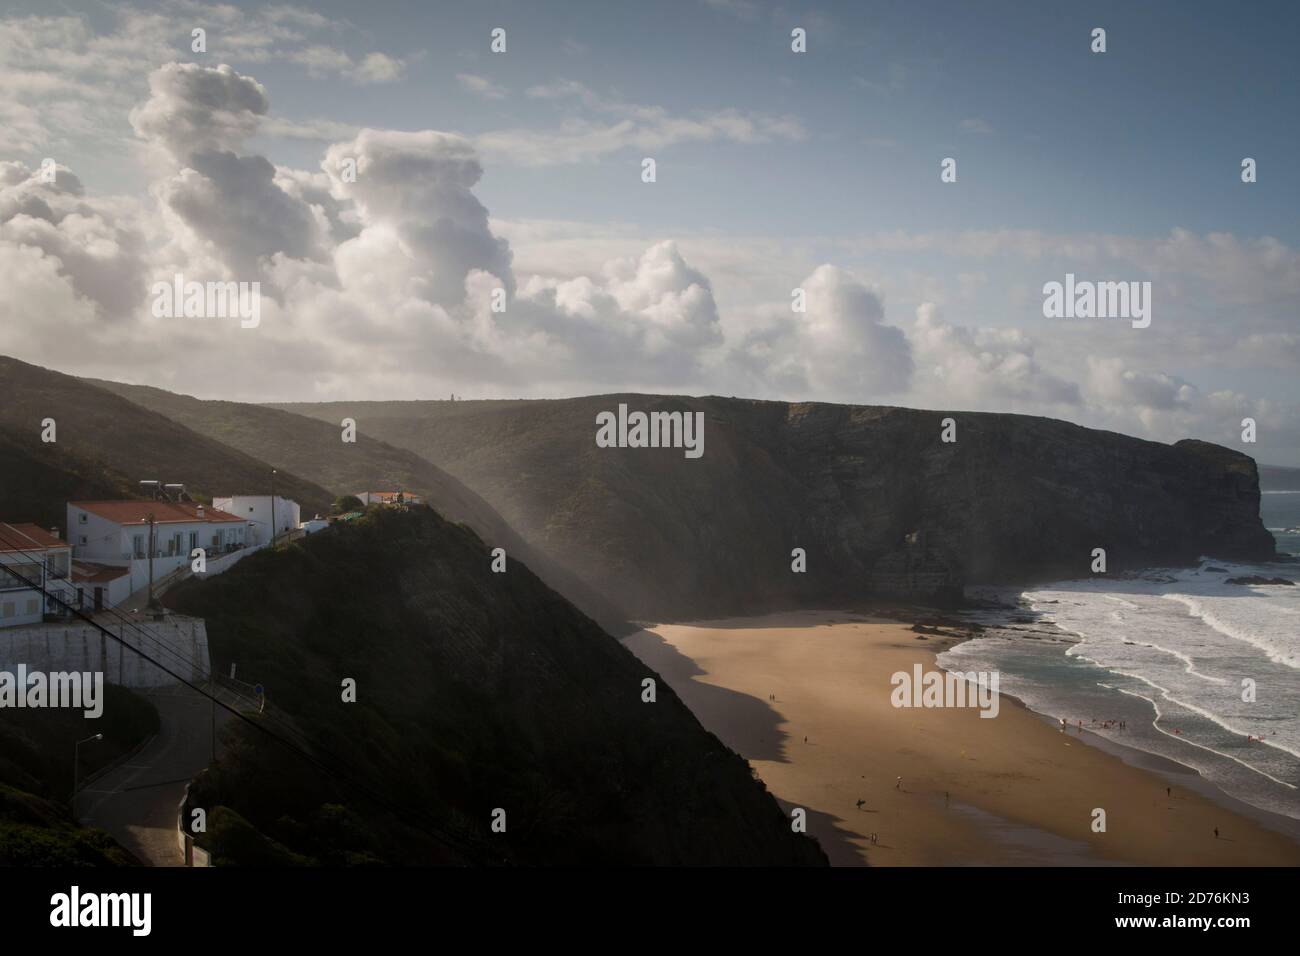 Soft morning light passing through the cliffs in a beach landscape under the clouds Stock Photo